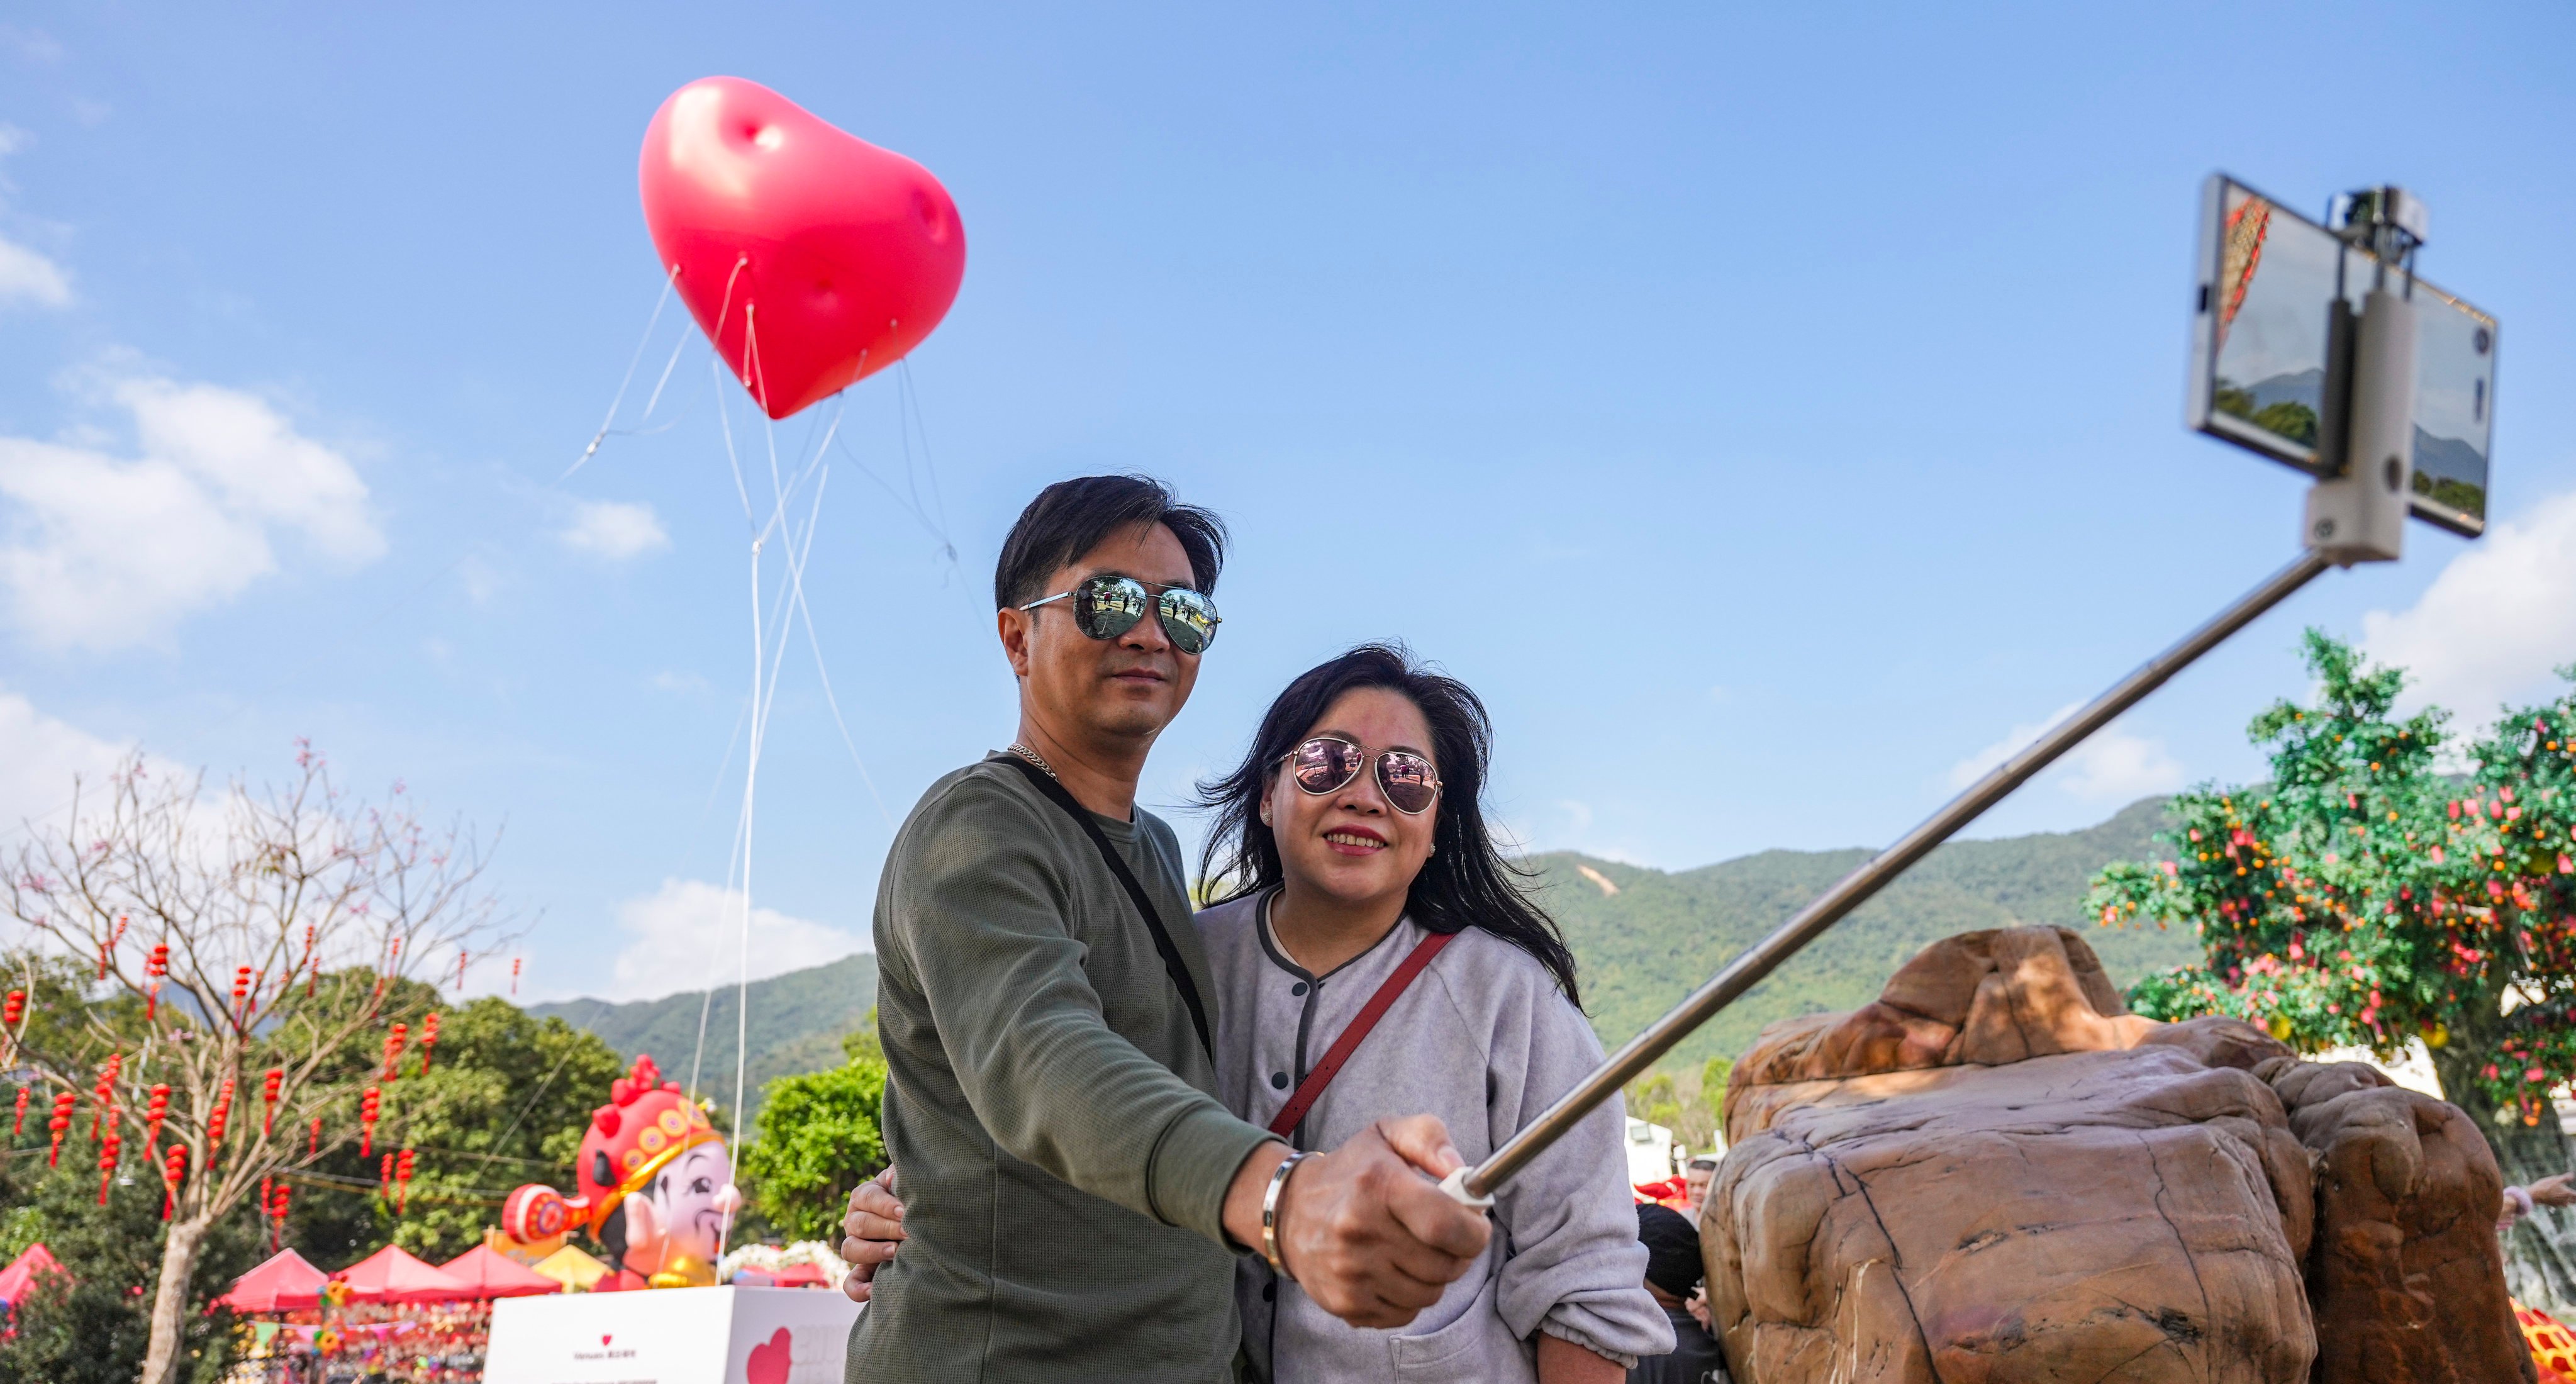 A couple takes selfies in front of a “Chubby Hearts” art installation by fashion designer Anya Hindmarch in Lam Tsuen, Tai Po, on Valentine’s day. Photo: Eugene Lee